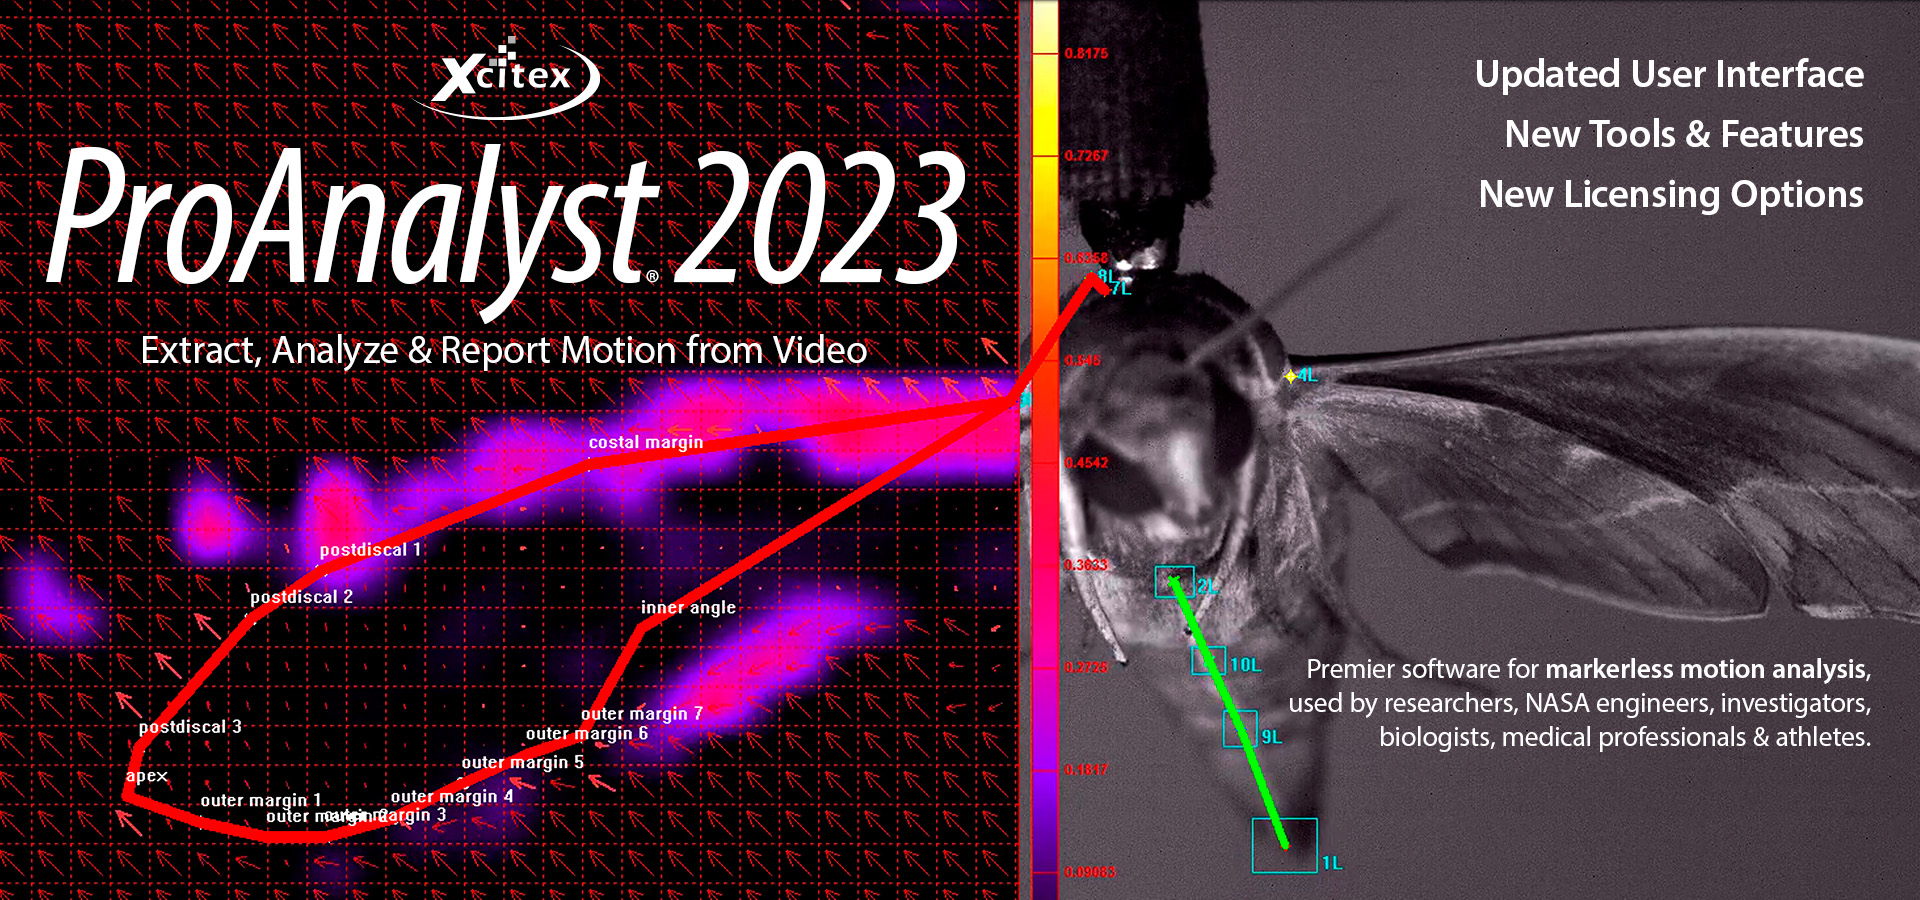 Xcitex ProAnalyst® 2023 feature image.